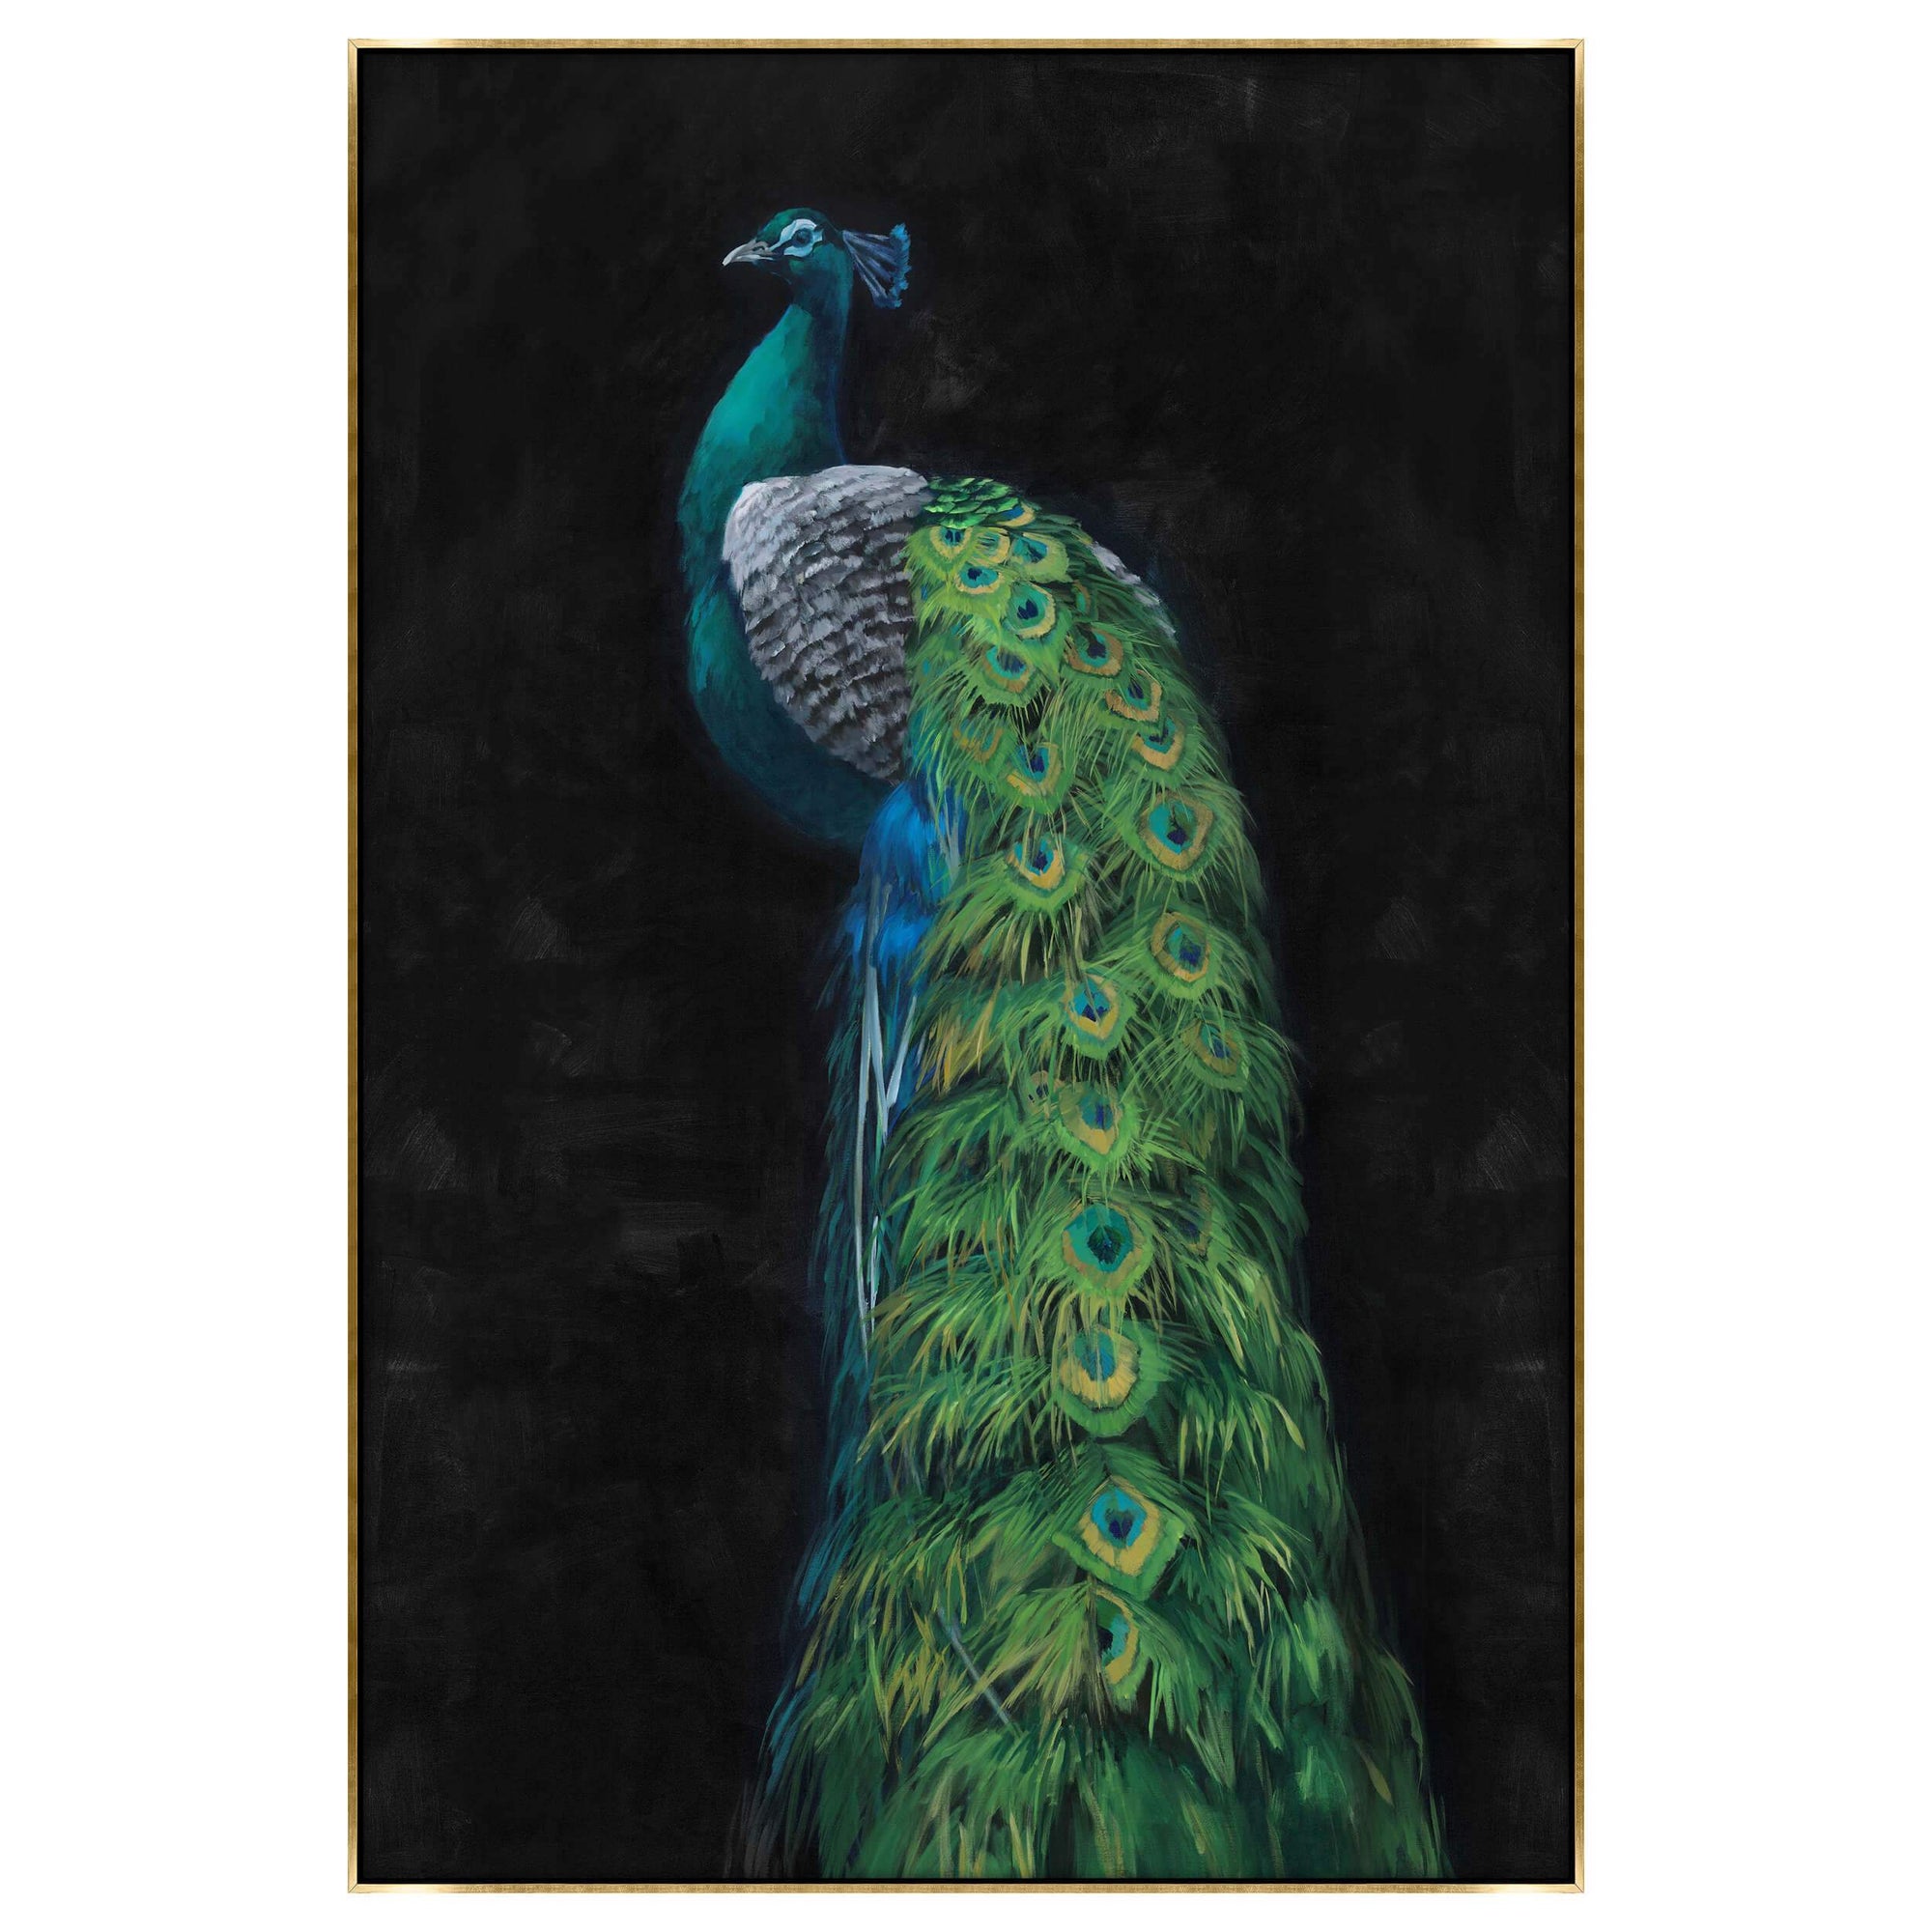 PEACOCK Ada watercolor artist, prices, quotations, auctions, images, photos